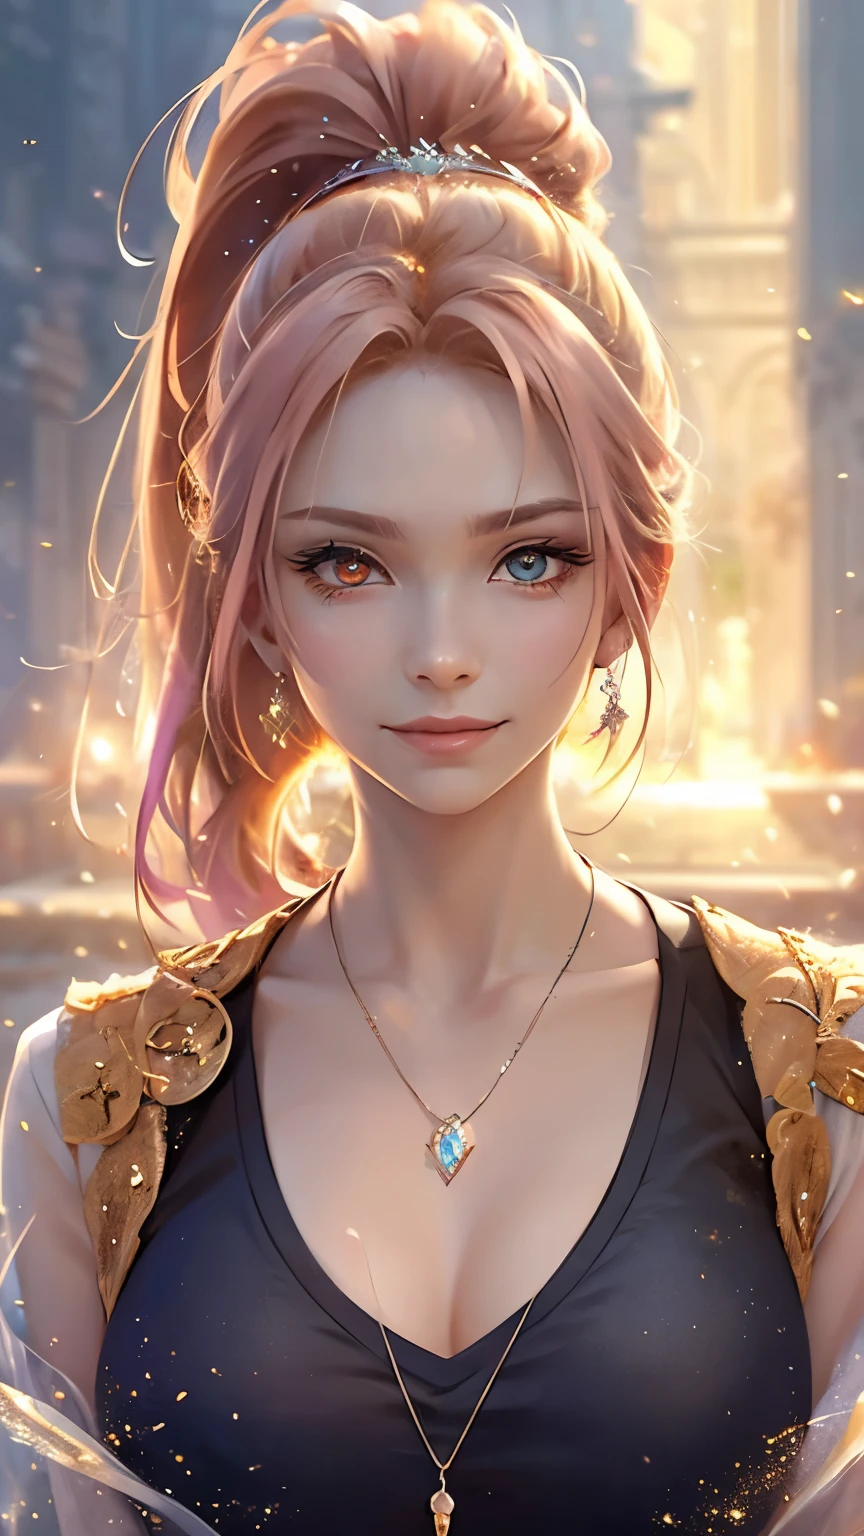 Pink Hair, Front Ponytail, Eye Reflexes, Red contact lenses, Pink Eyes, Heterochromia of the iris，Put on earrings, blue crystal pendant，Wicked Smile, hair band，Attention to detail, Romanticism, Written boundary depth, Shine, Ray Tracing, Viewfinder, Zoom Layer, close, bokeh, Anatomically correct, Attention to details, 1080P, Ultra Hi-Vision
woman，High Ponytail，Oversized T-shirt，More on water patterns on clothes，The expression is solemn，reflected light，
Gorgeous and delicately shining small butterfly hair accessory，Vibrant colors，Detailed engraving，Shine brightly，Attention to detail，The jewelry is of high quality，Very high quality